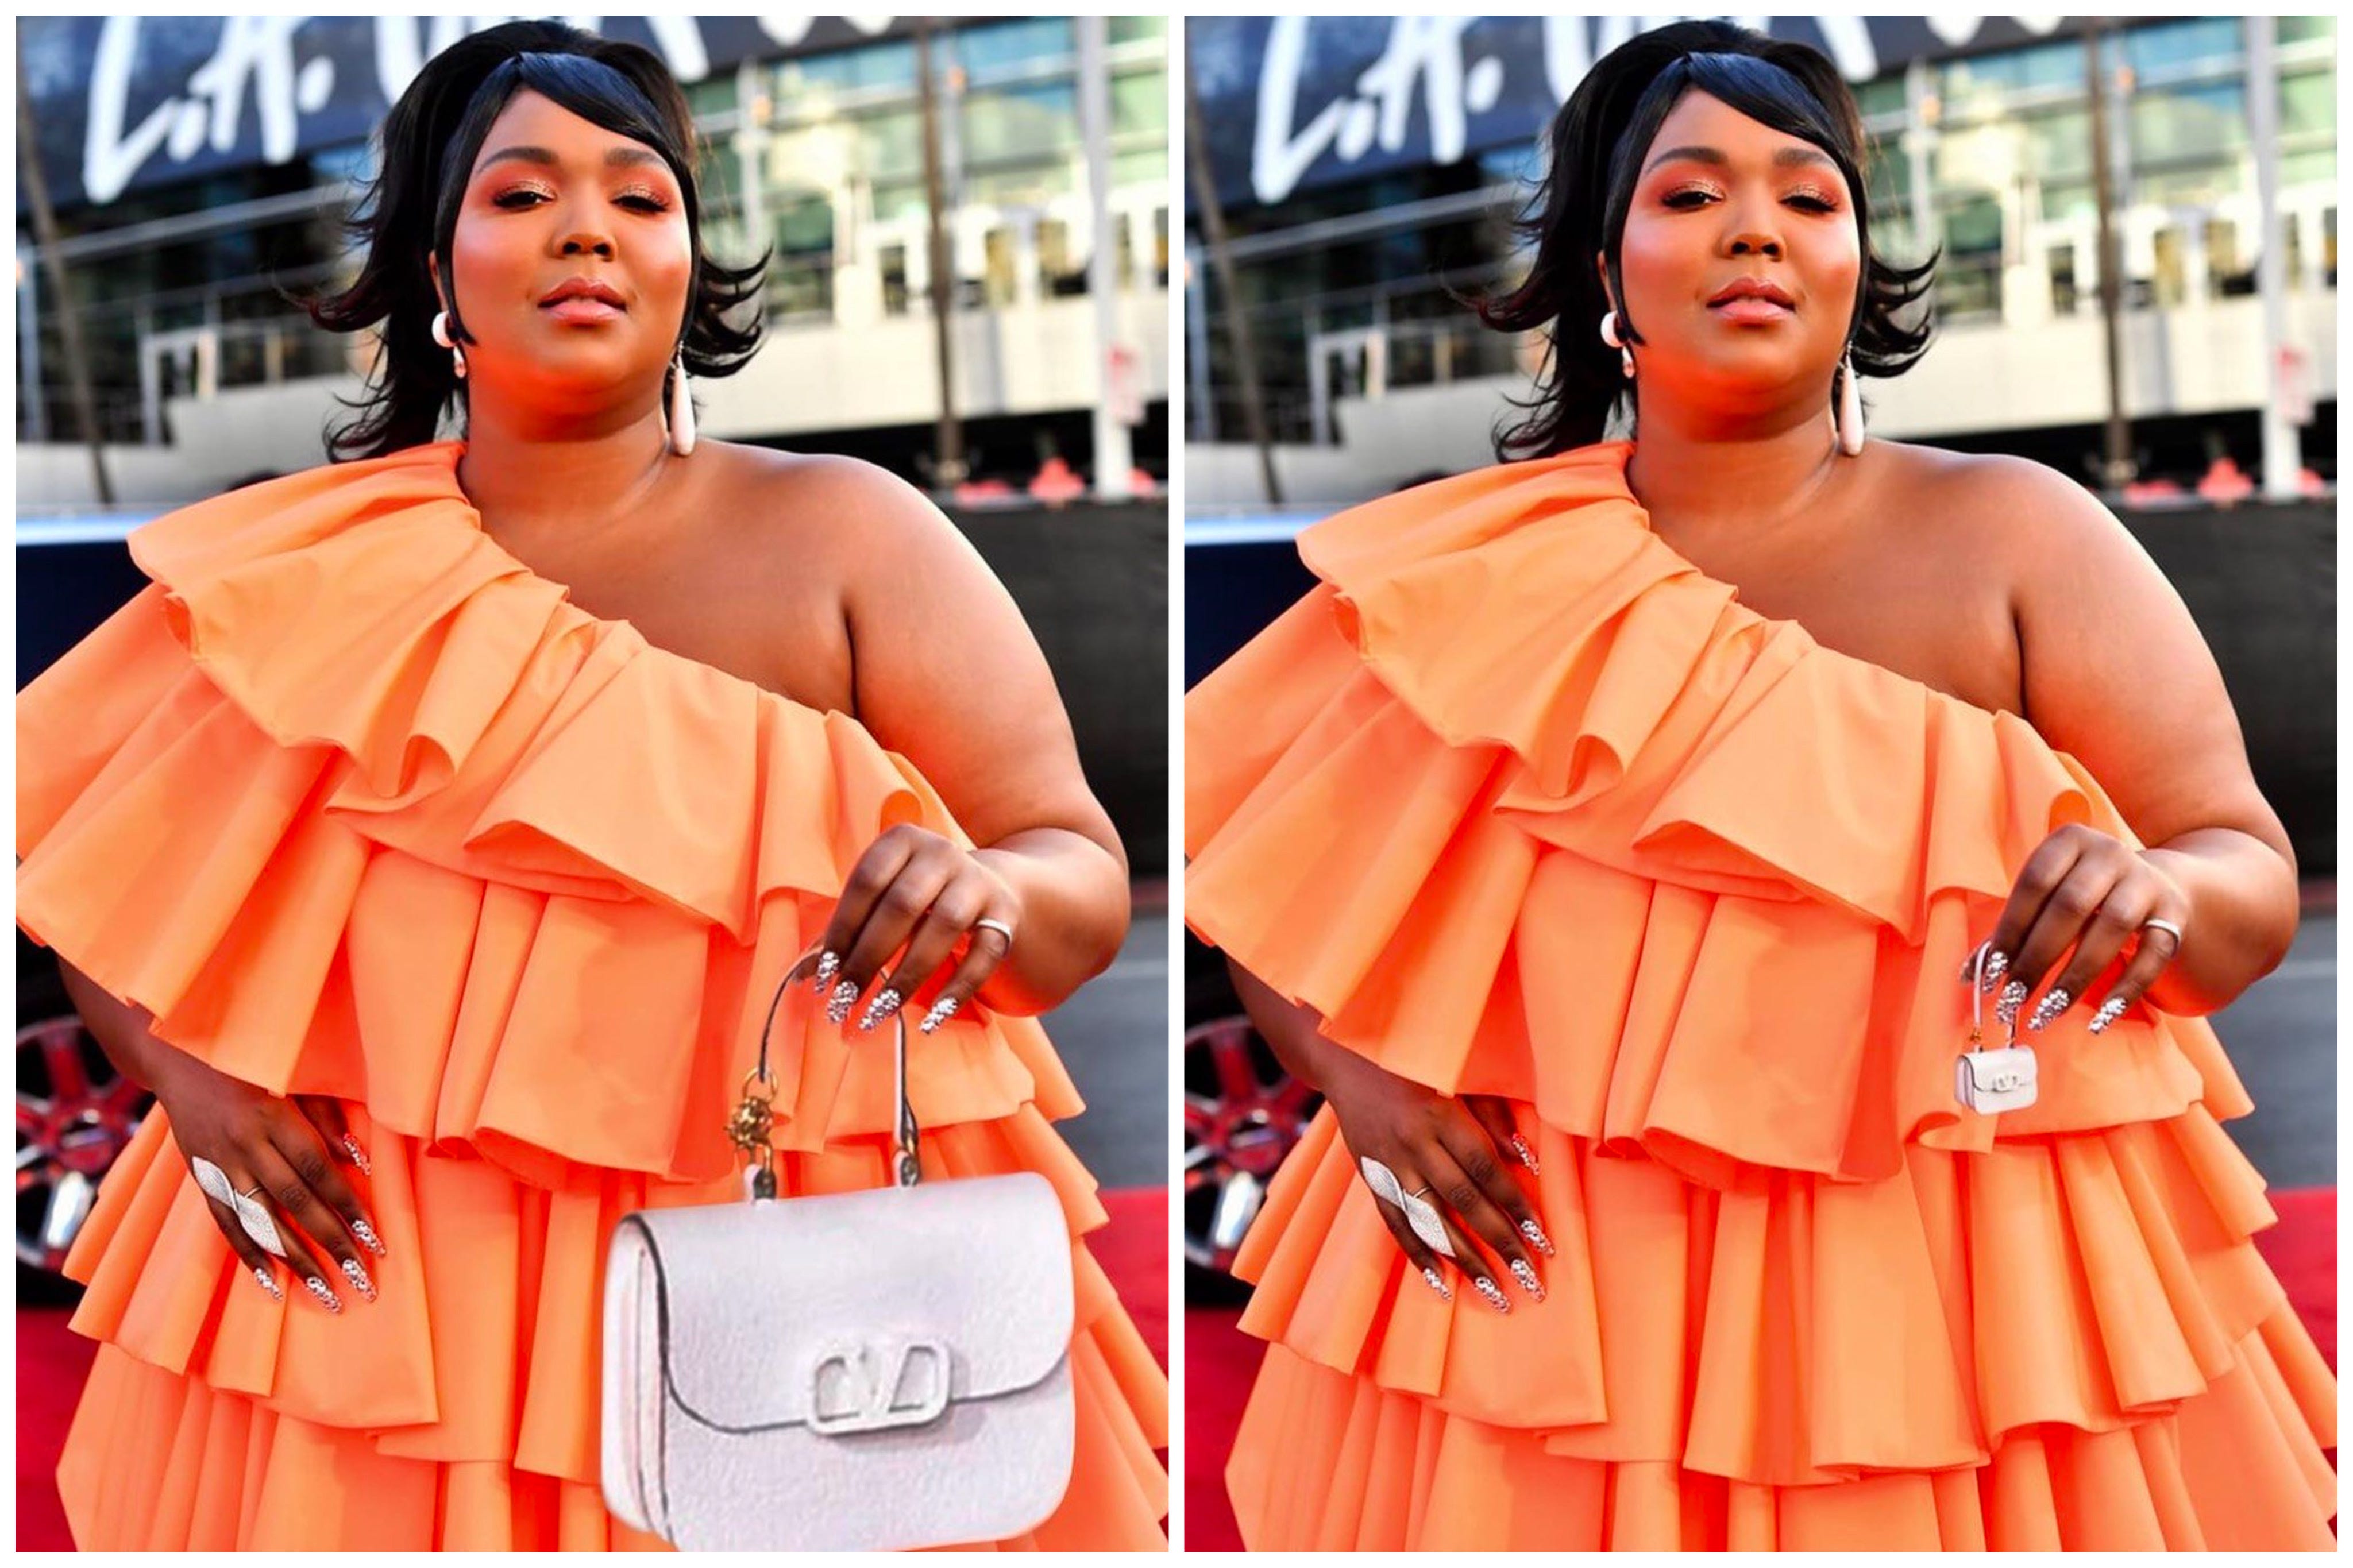 Fan theories about what's inside Lizzo's tiny bag at the AMAs